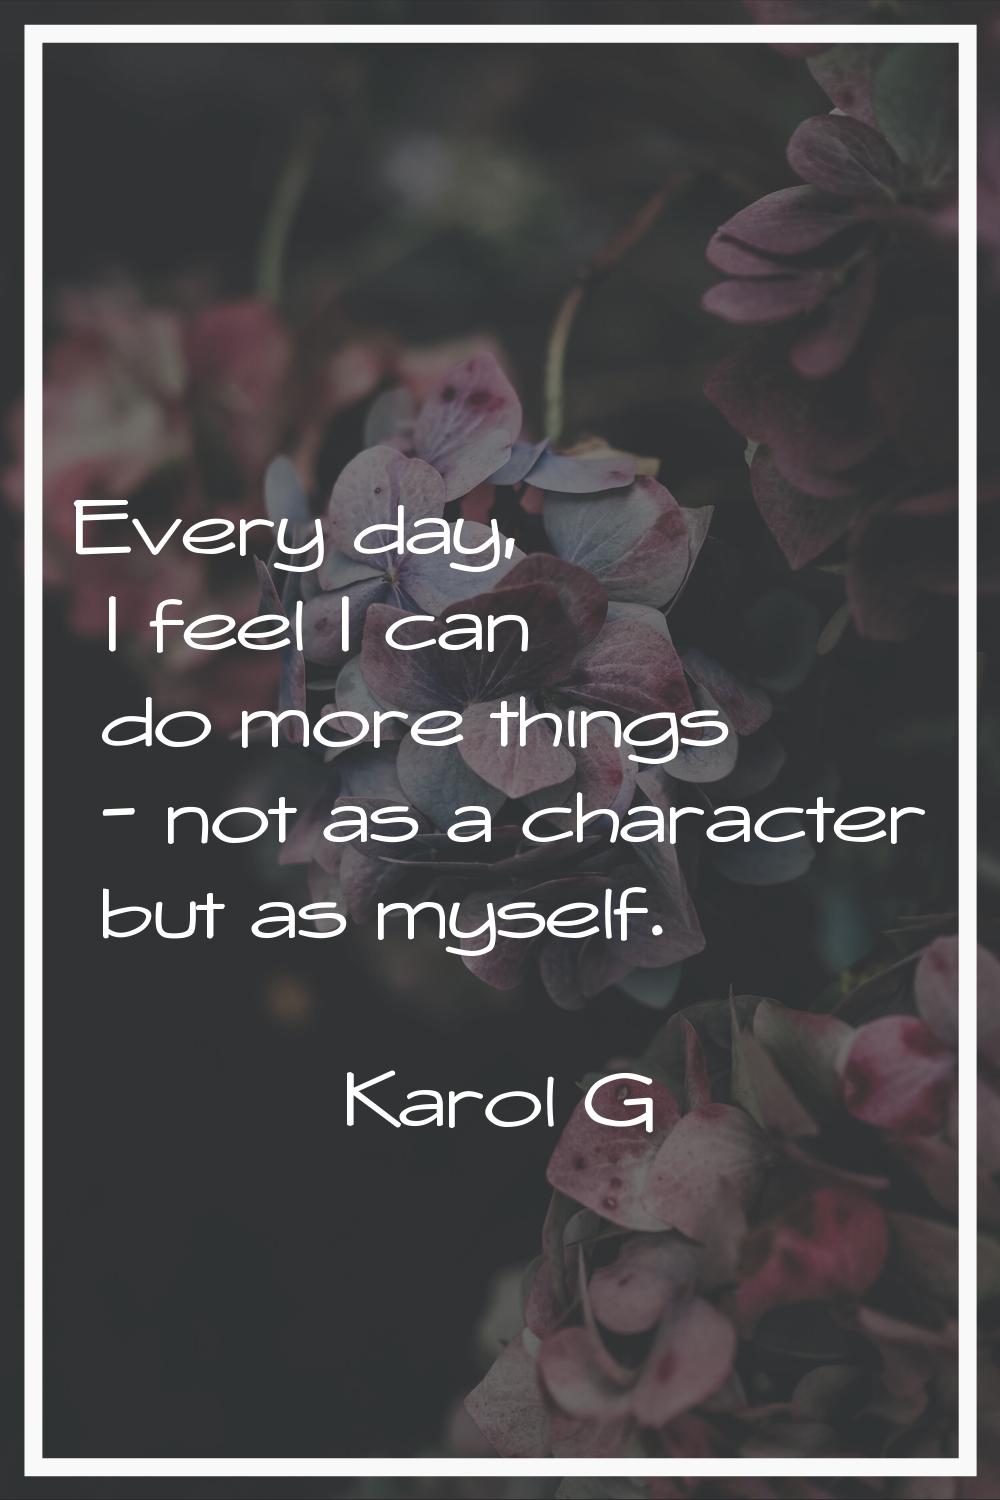 Every day, I feel I can do more things - not as a character but as myself.